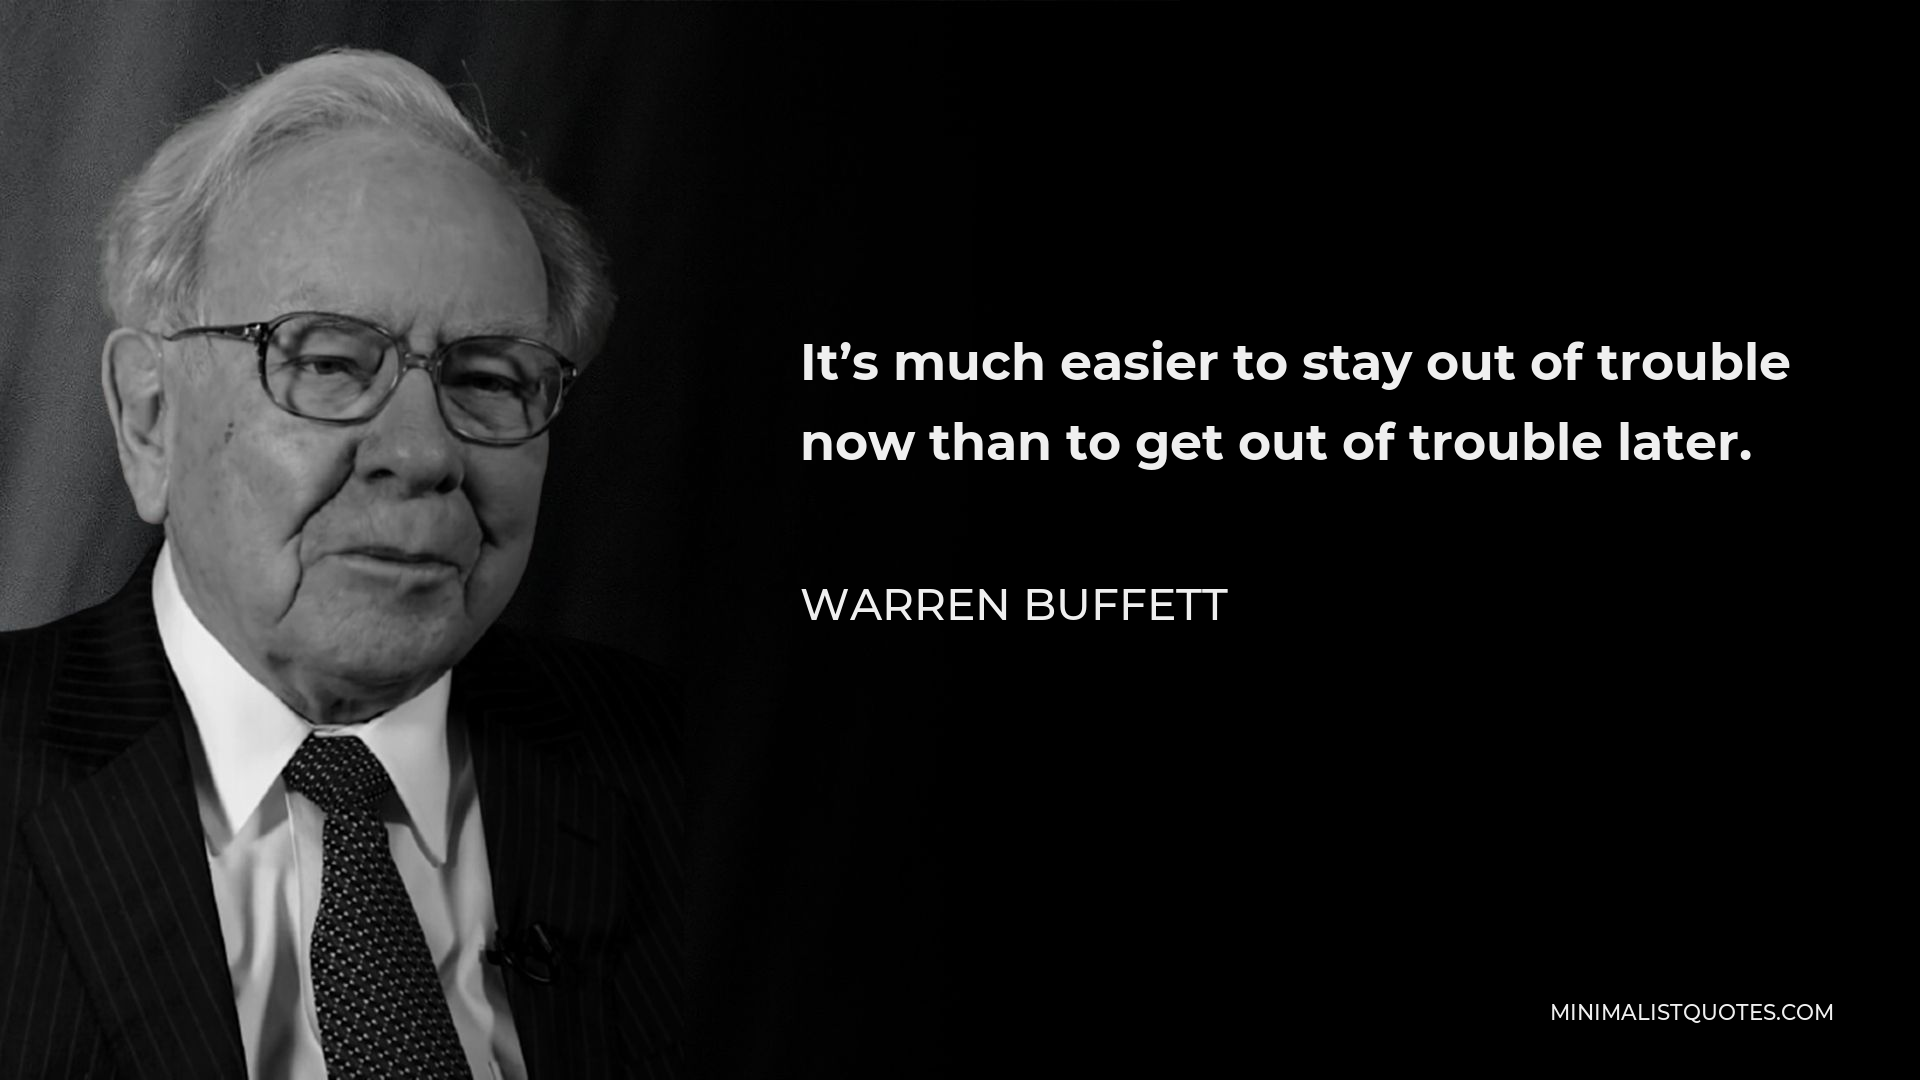 Warren Buffett Quote - It’s much easier to stay out of trouble now than to get out of trouble later.